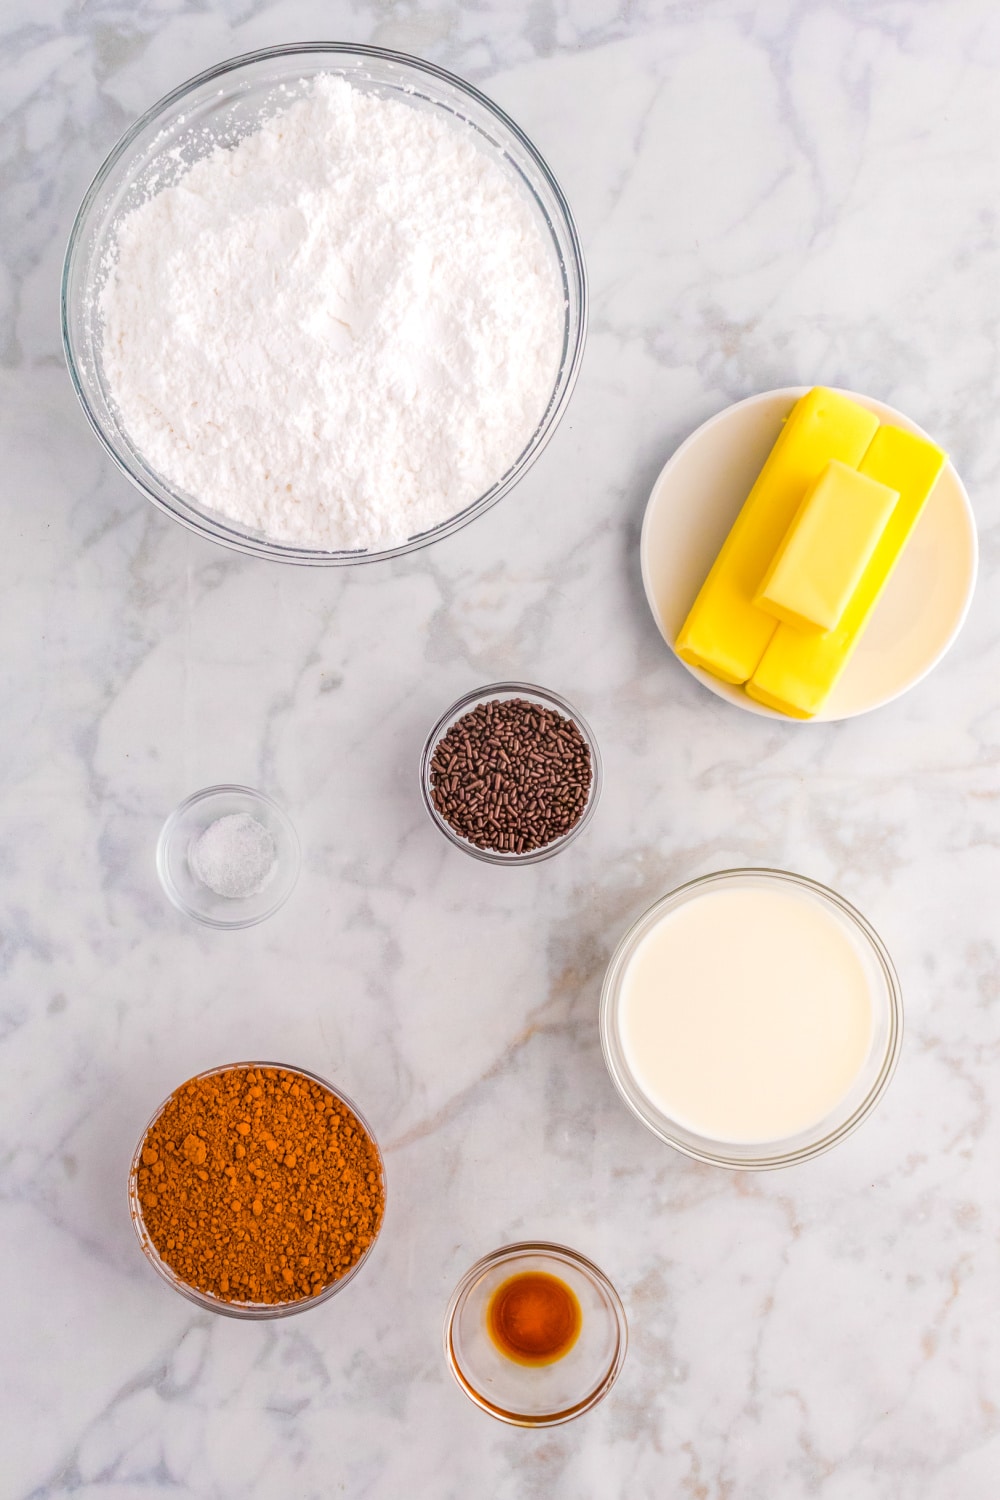 Measured ingredients needed to make chocolate frosting presented on a white marble countertop.